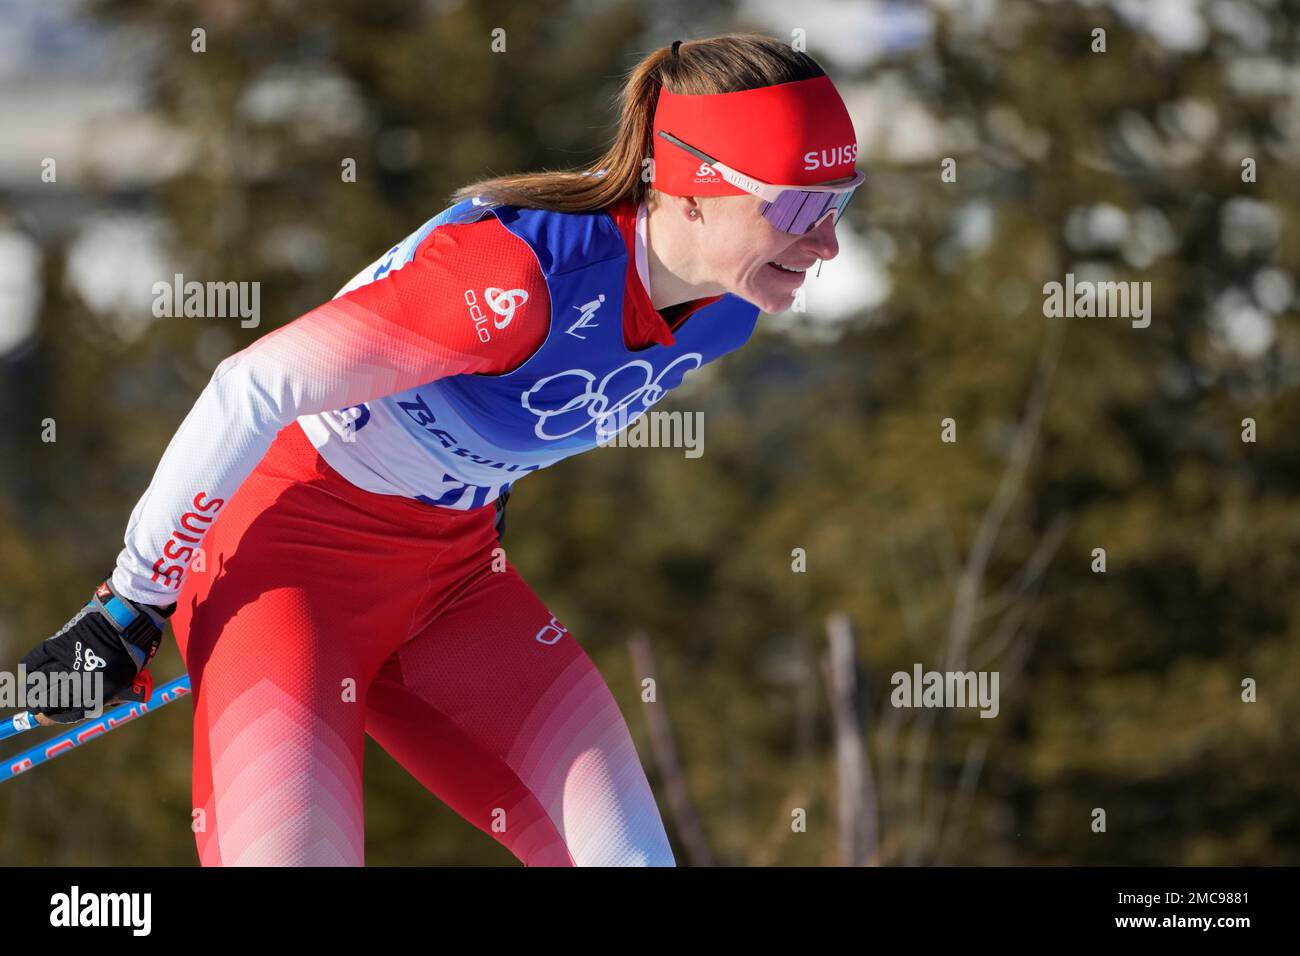 Nadine Faehndrich, of Switzerland, competes during the womens sprint free cross-country skiing competition at the 2022 Winter Olympics, Tuesday, Feb